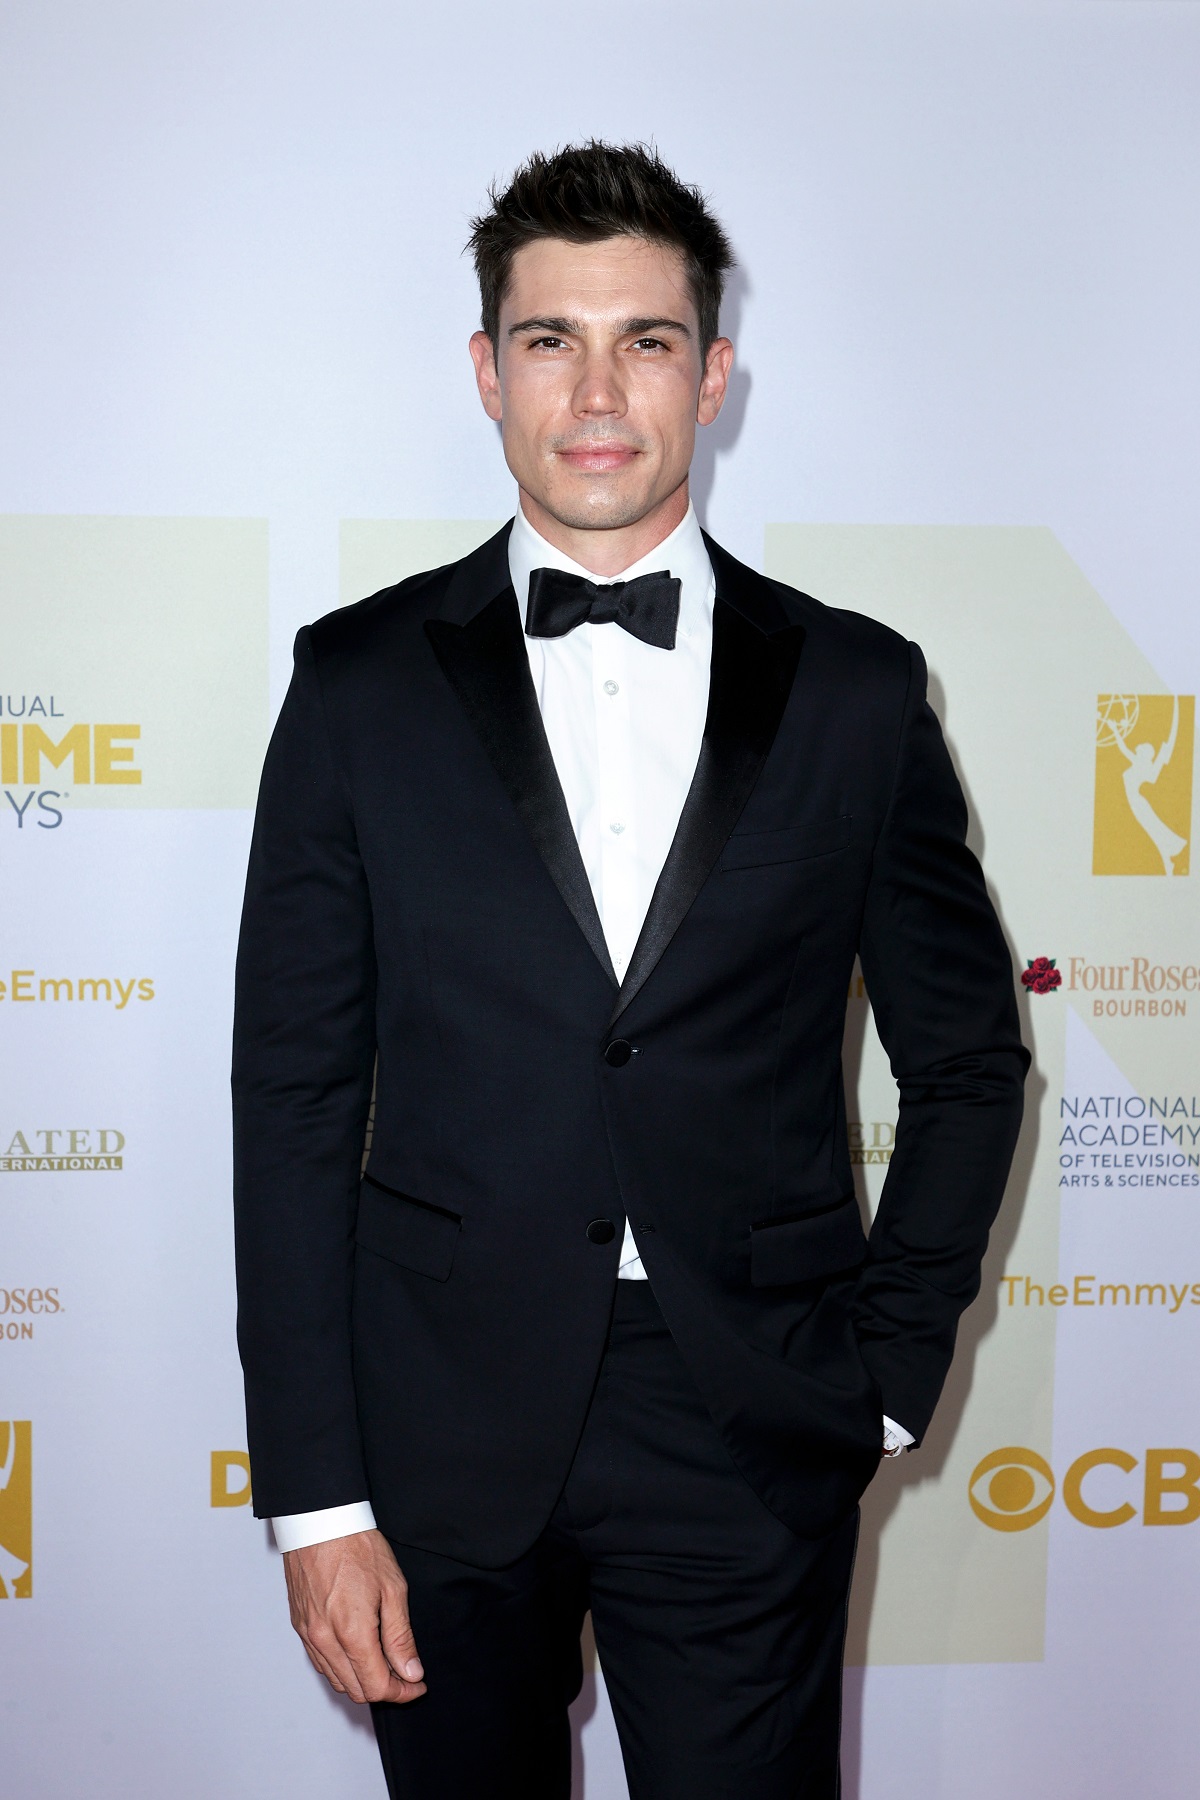 'The Bold and the Beautiful' star Tanner Novlan dressed in a tuxedo at the 2021 Daytime Emmy Awards.